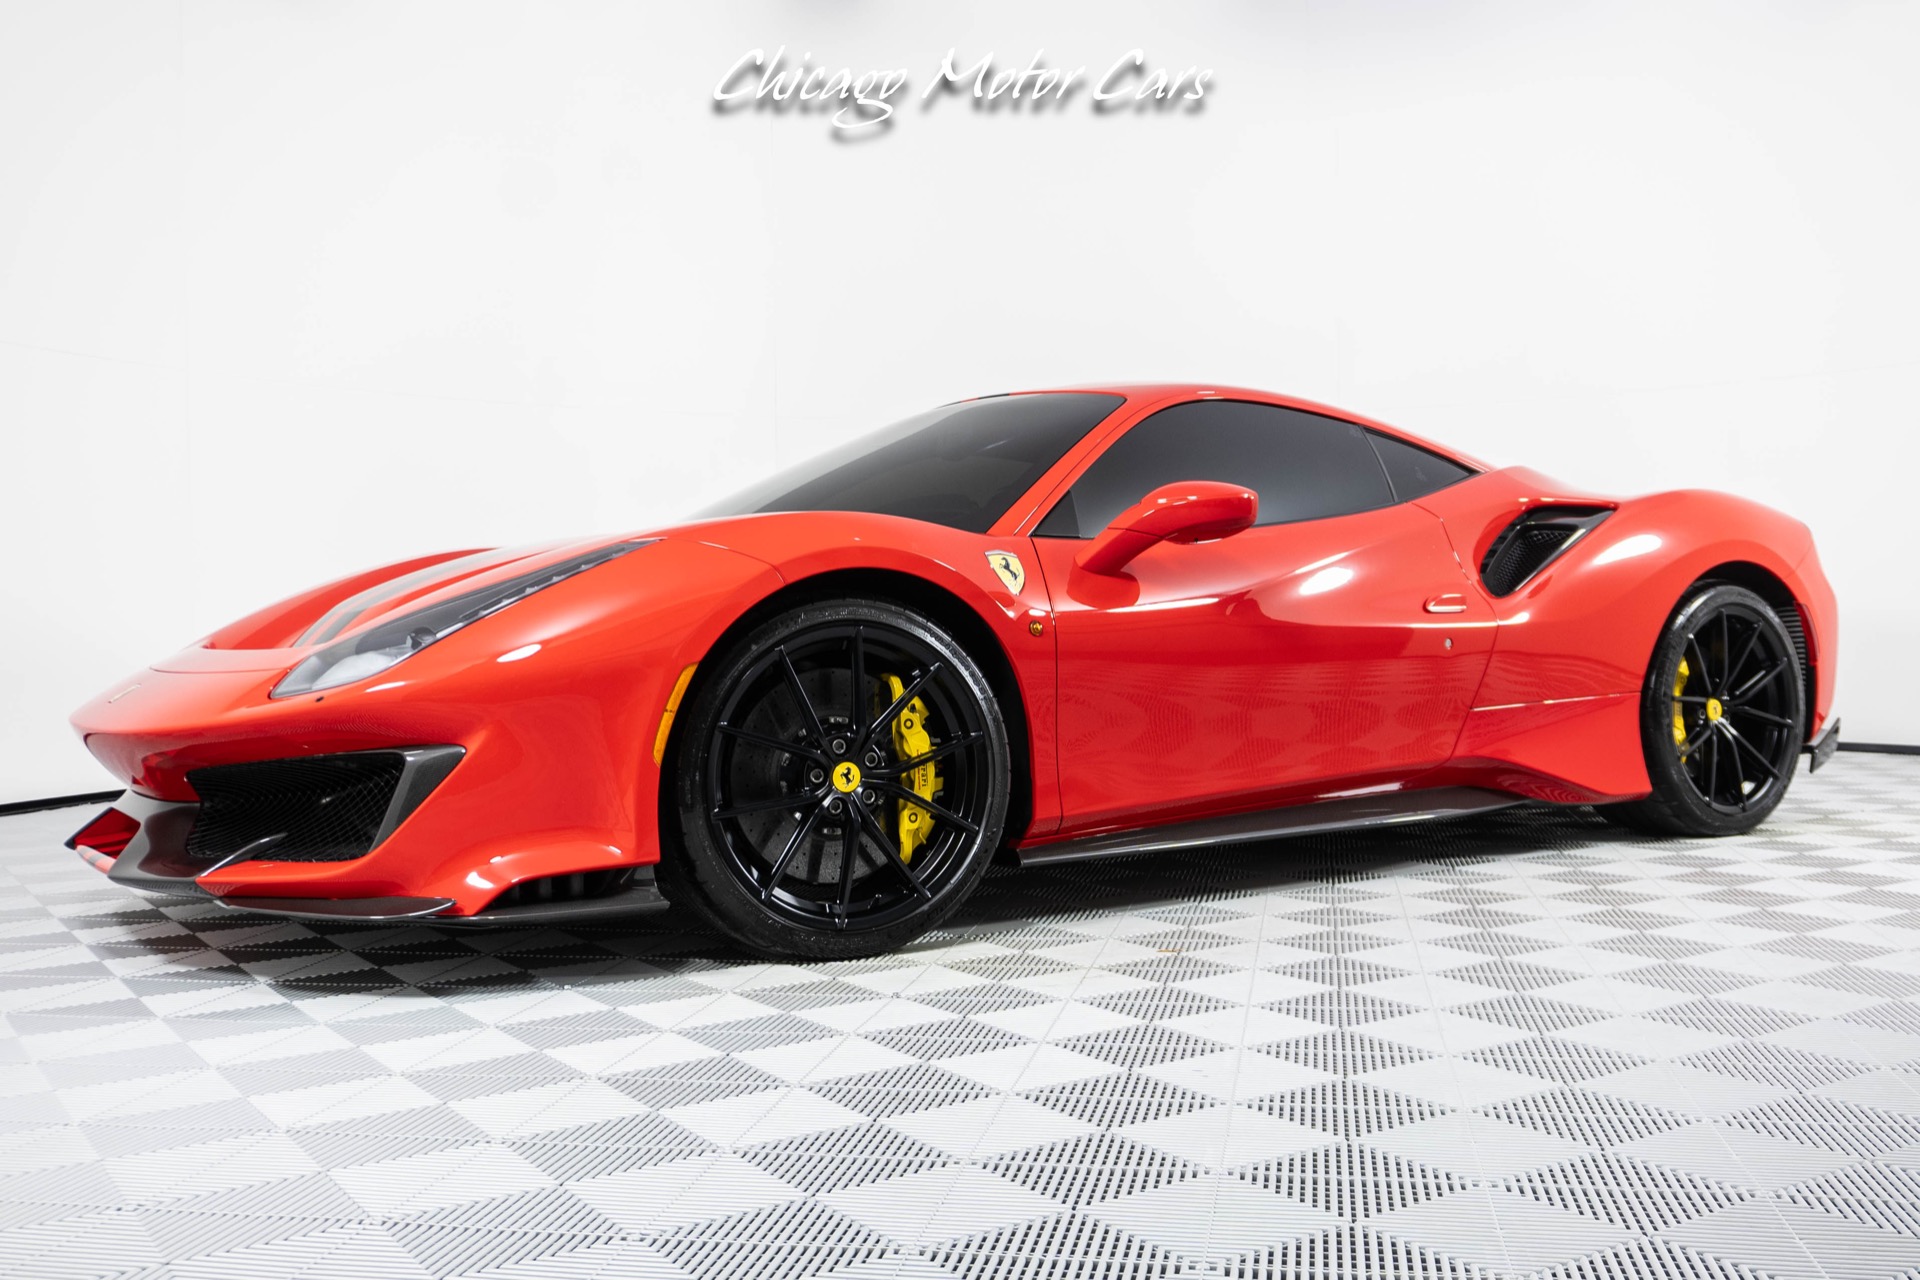 Used-2020-Ferrari-488-Pista-Only-3K-Miles-Beautiful-Spec-Full-Body-PPF-Front-End-Lifter-Loaded